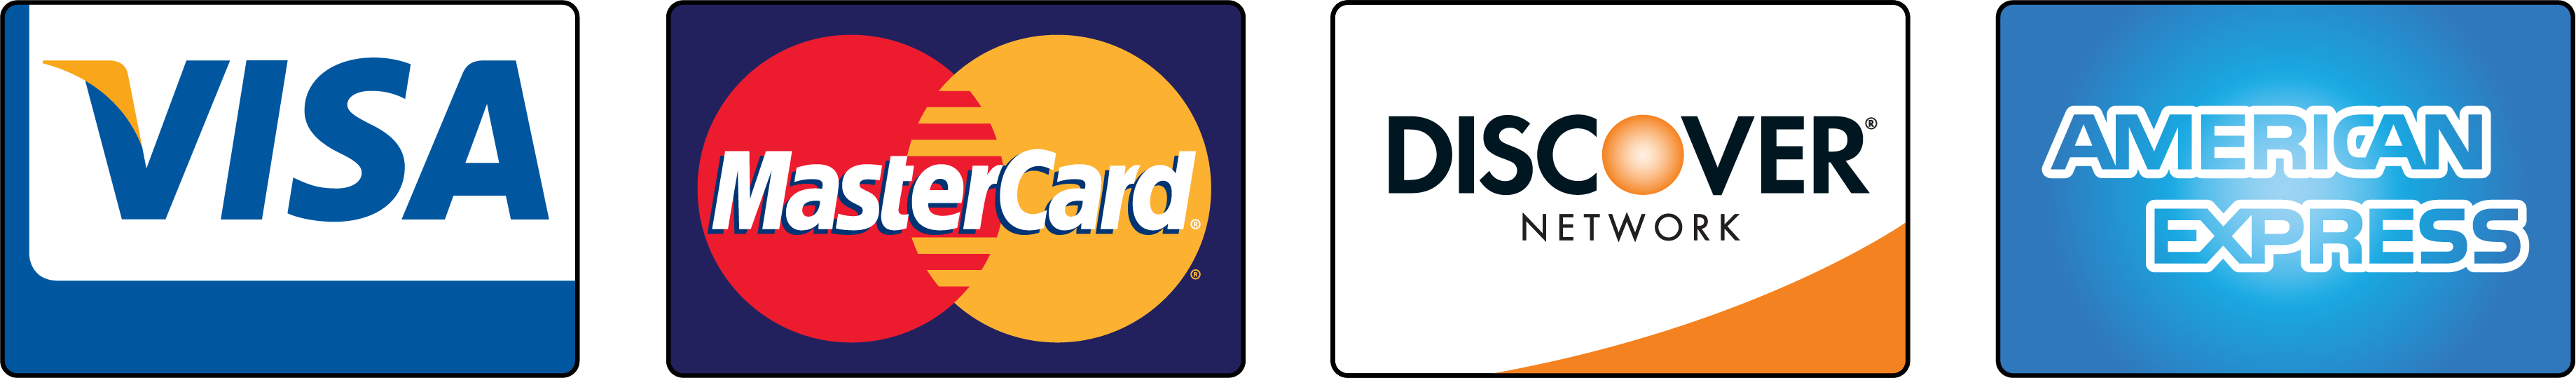 credit-card-icons